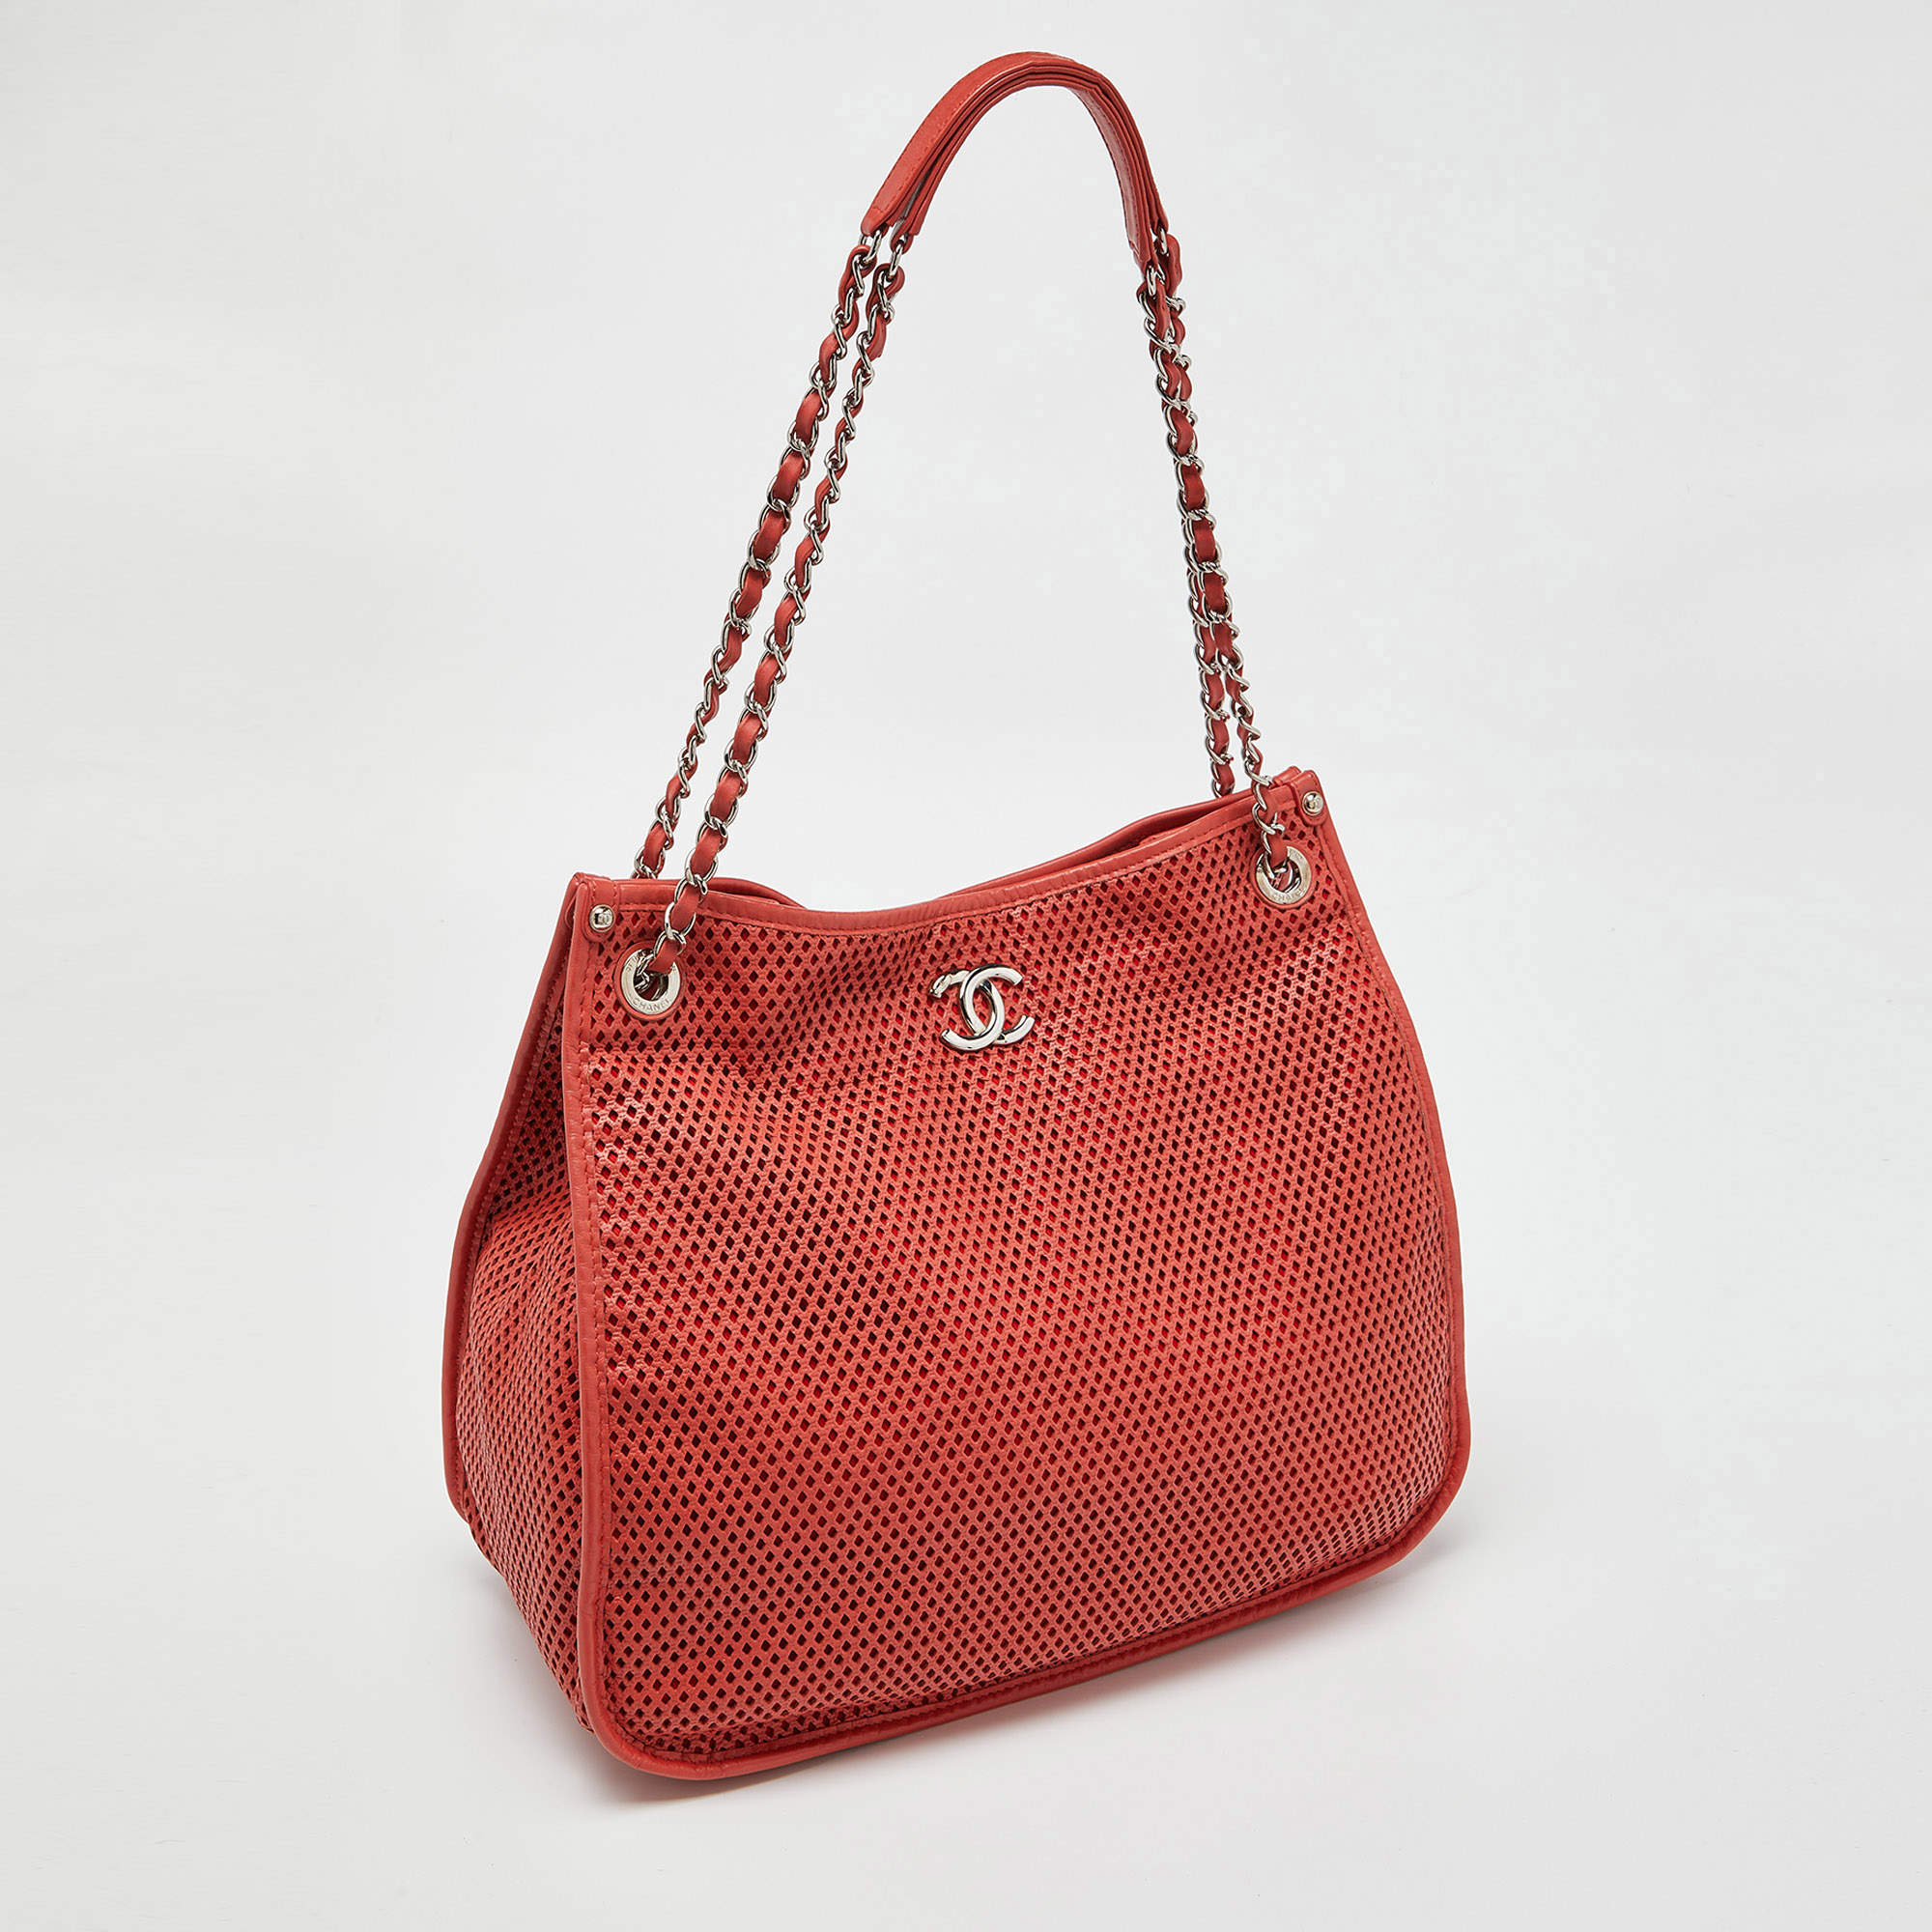 Chanel Red Perforated Leather Up in the Air Shoulder Bag